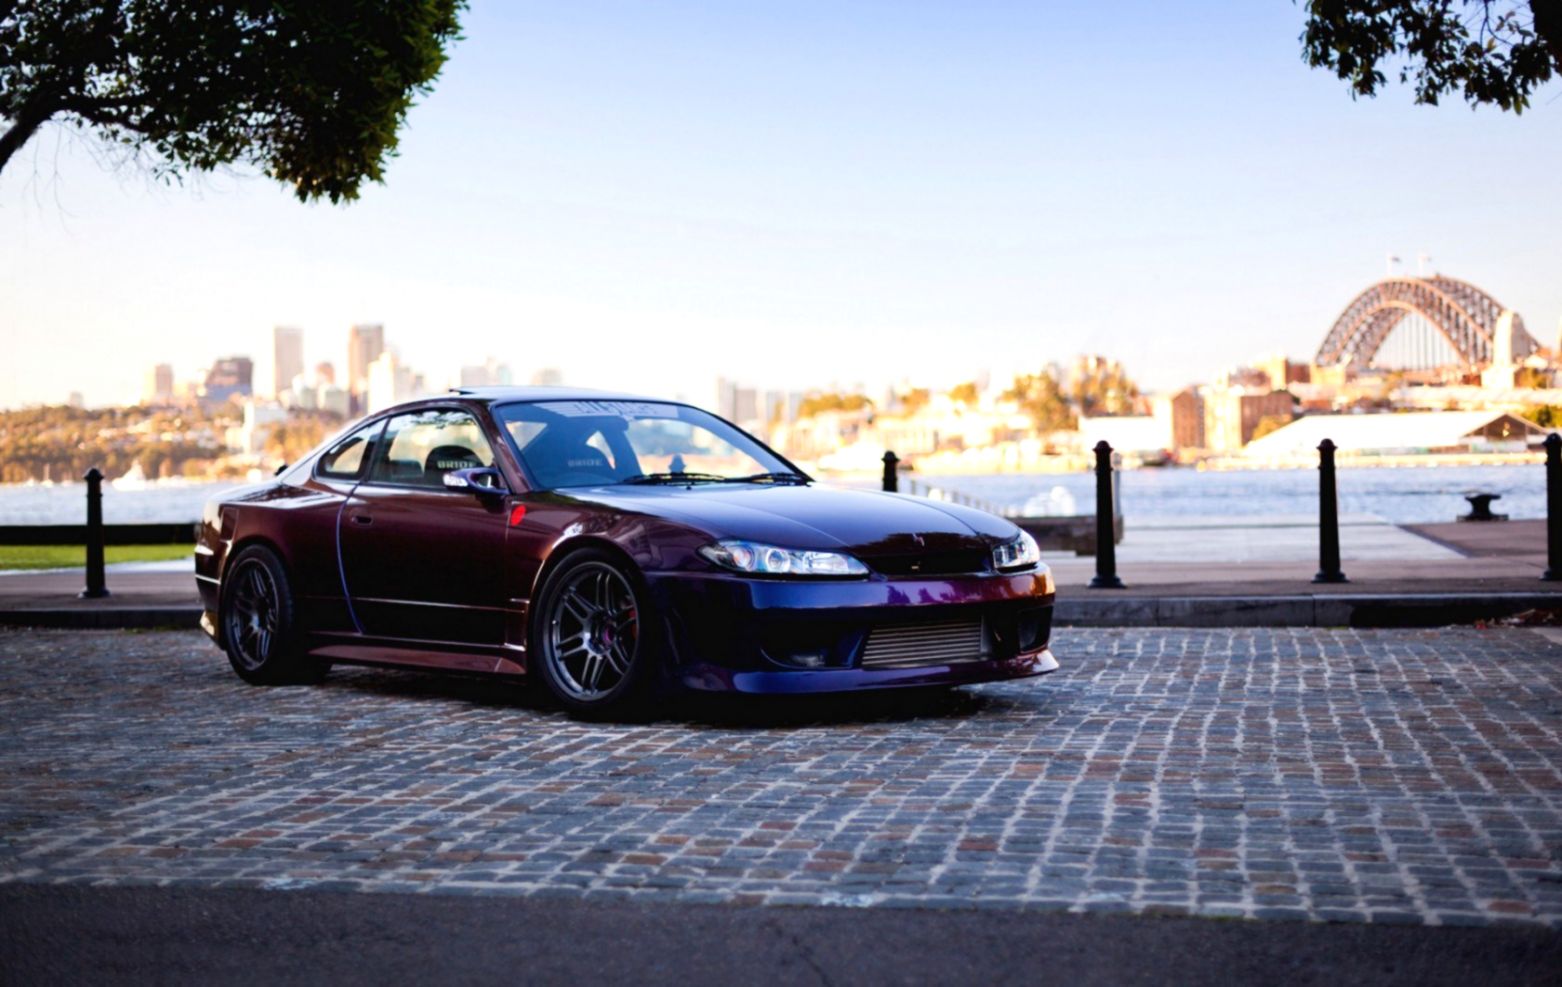 Nissan Silvia Spec R S15 Tuning Car Parking - Nissan Silvia S15 Tuning , HD Wallpaper & Backgrounds